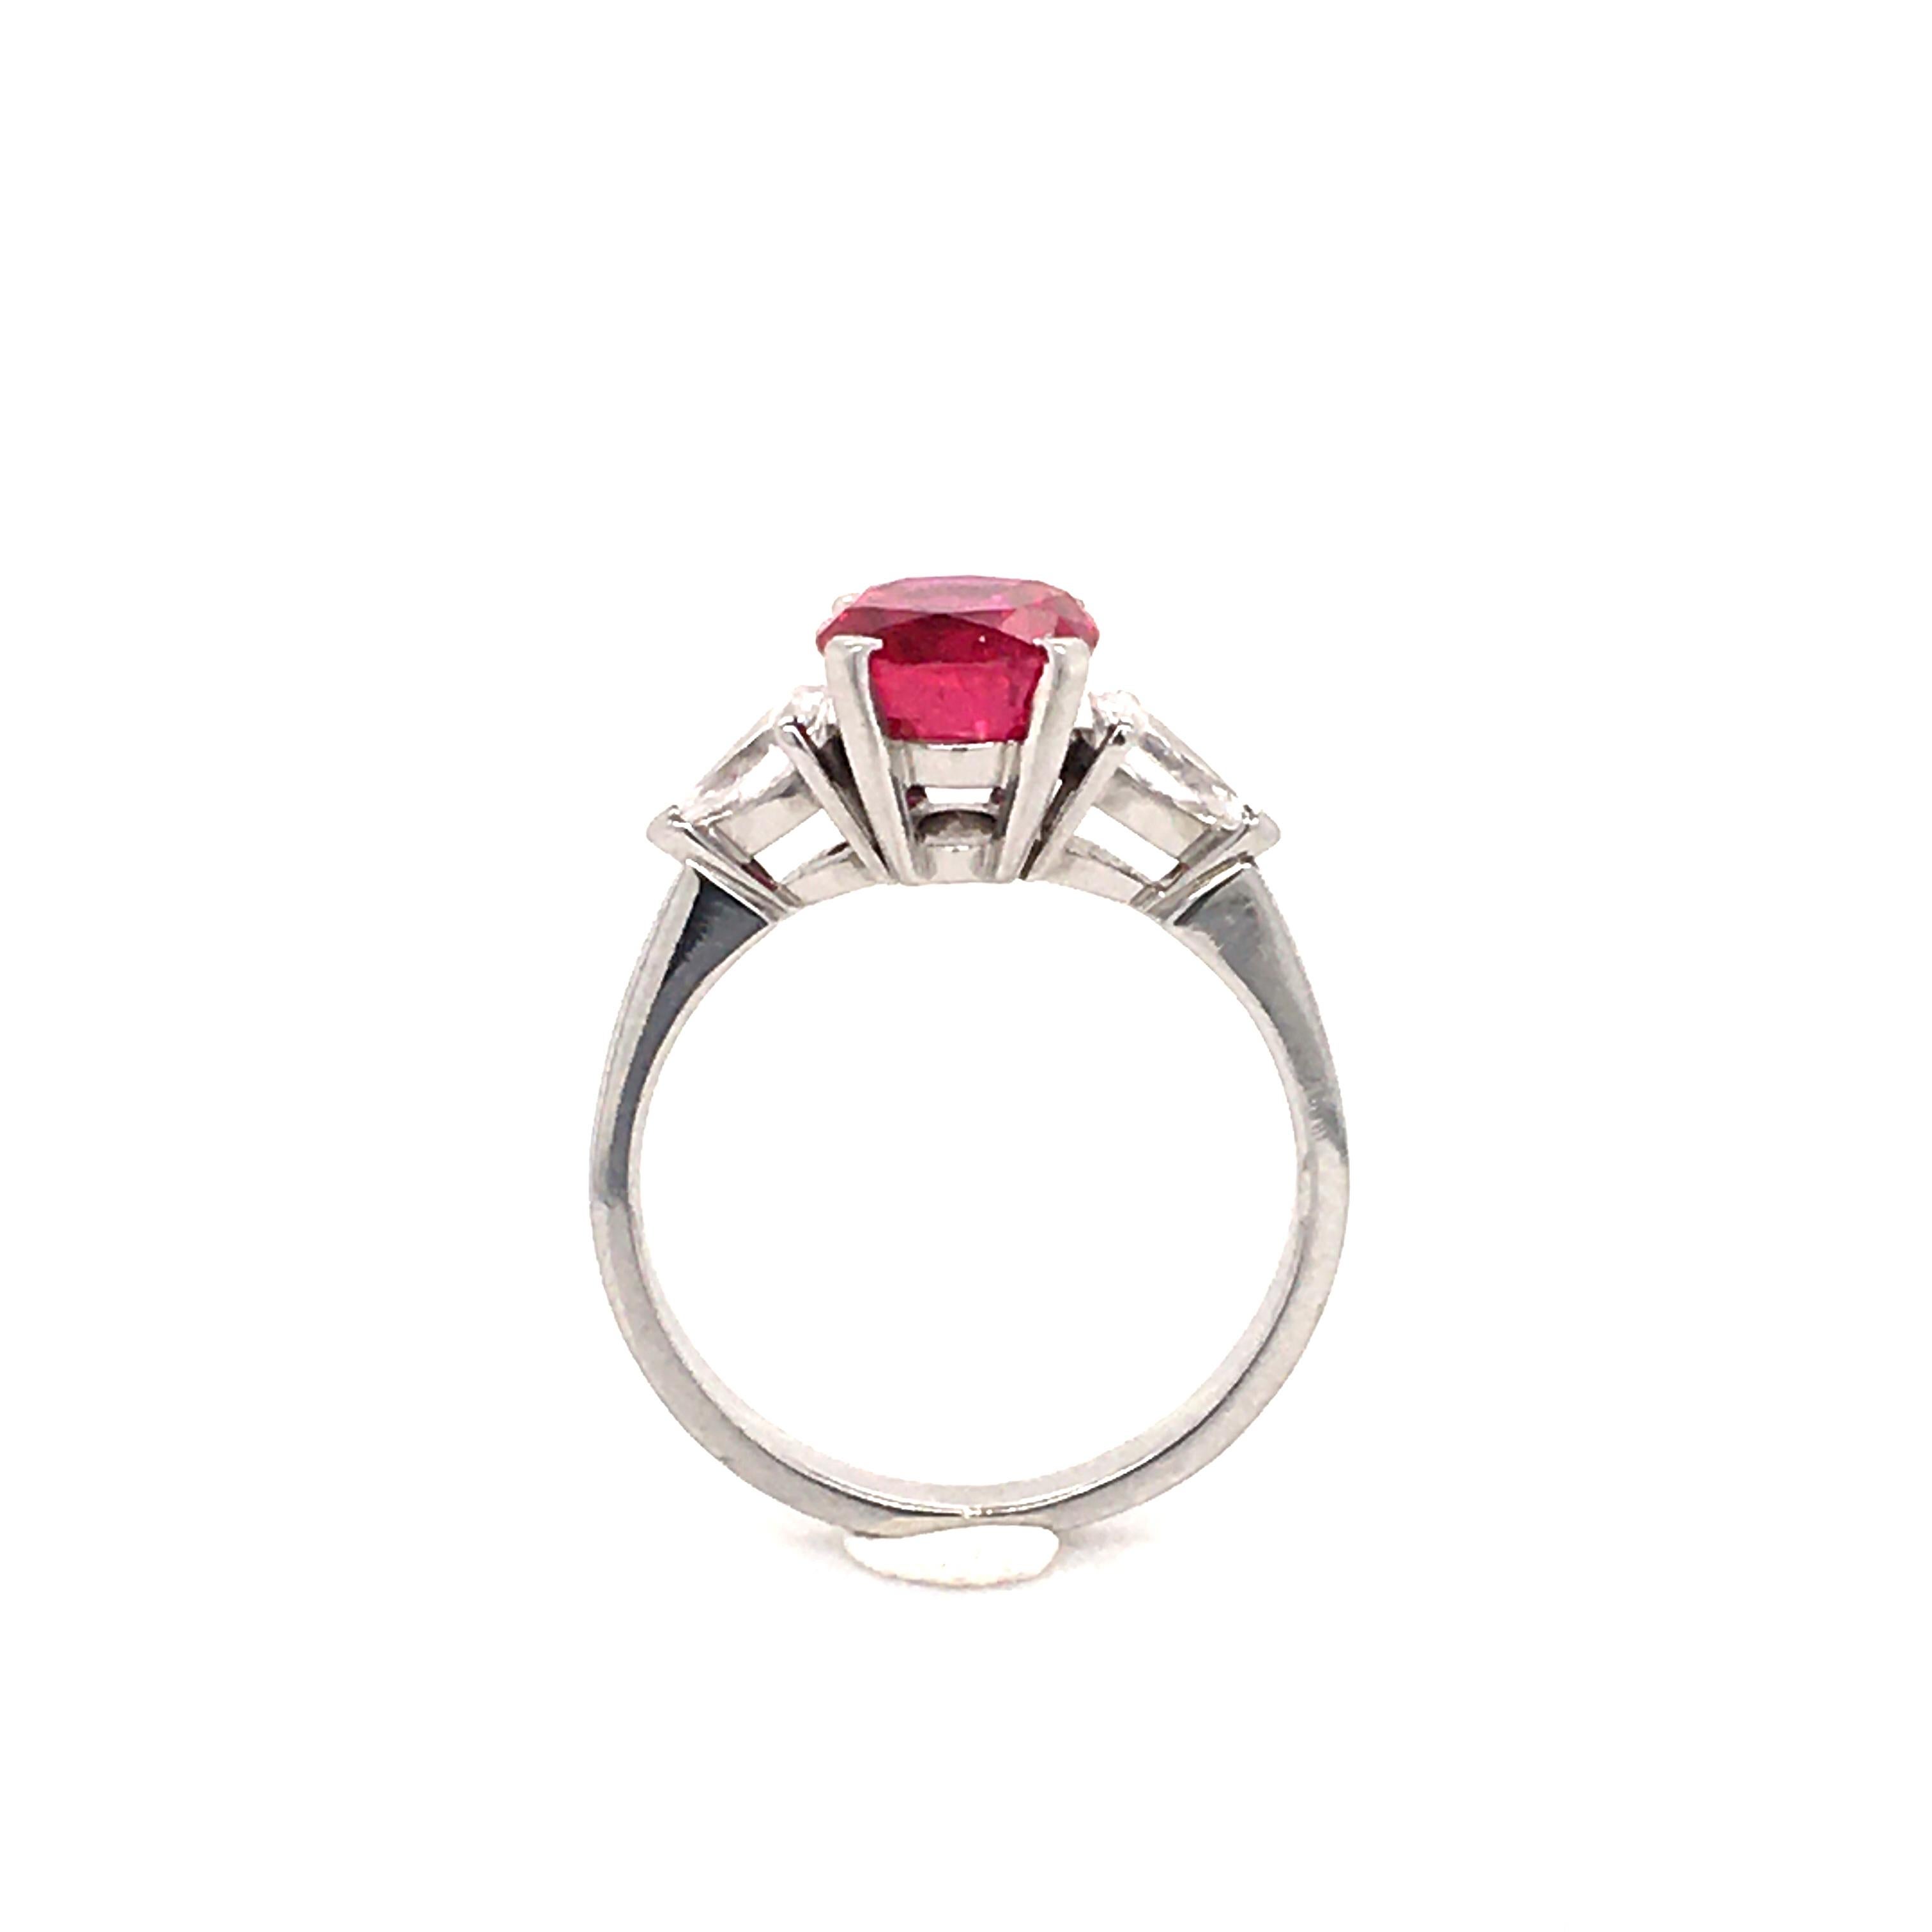 Superb Gubelin Ring with a 2.35 Carat Untreated Burmese Ruby and Diamonds 3